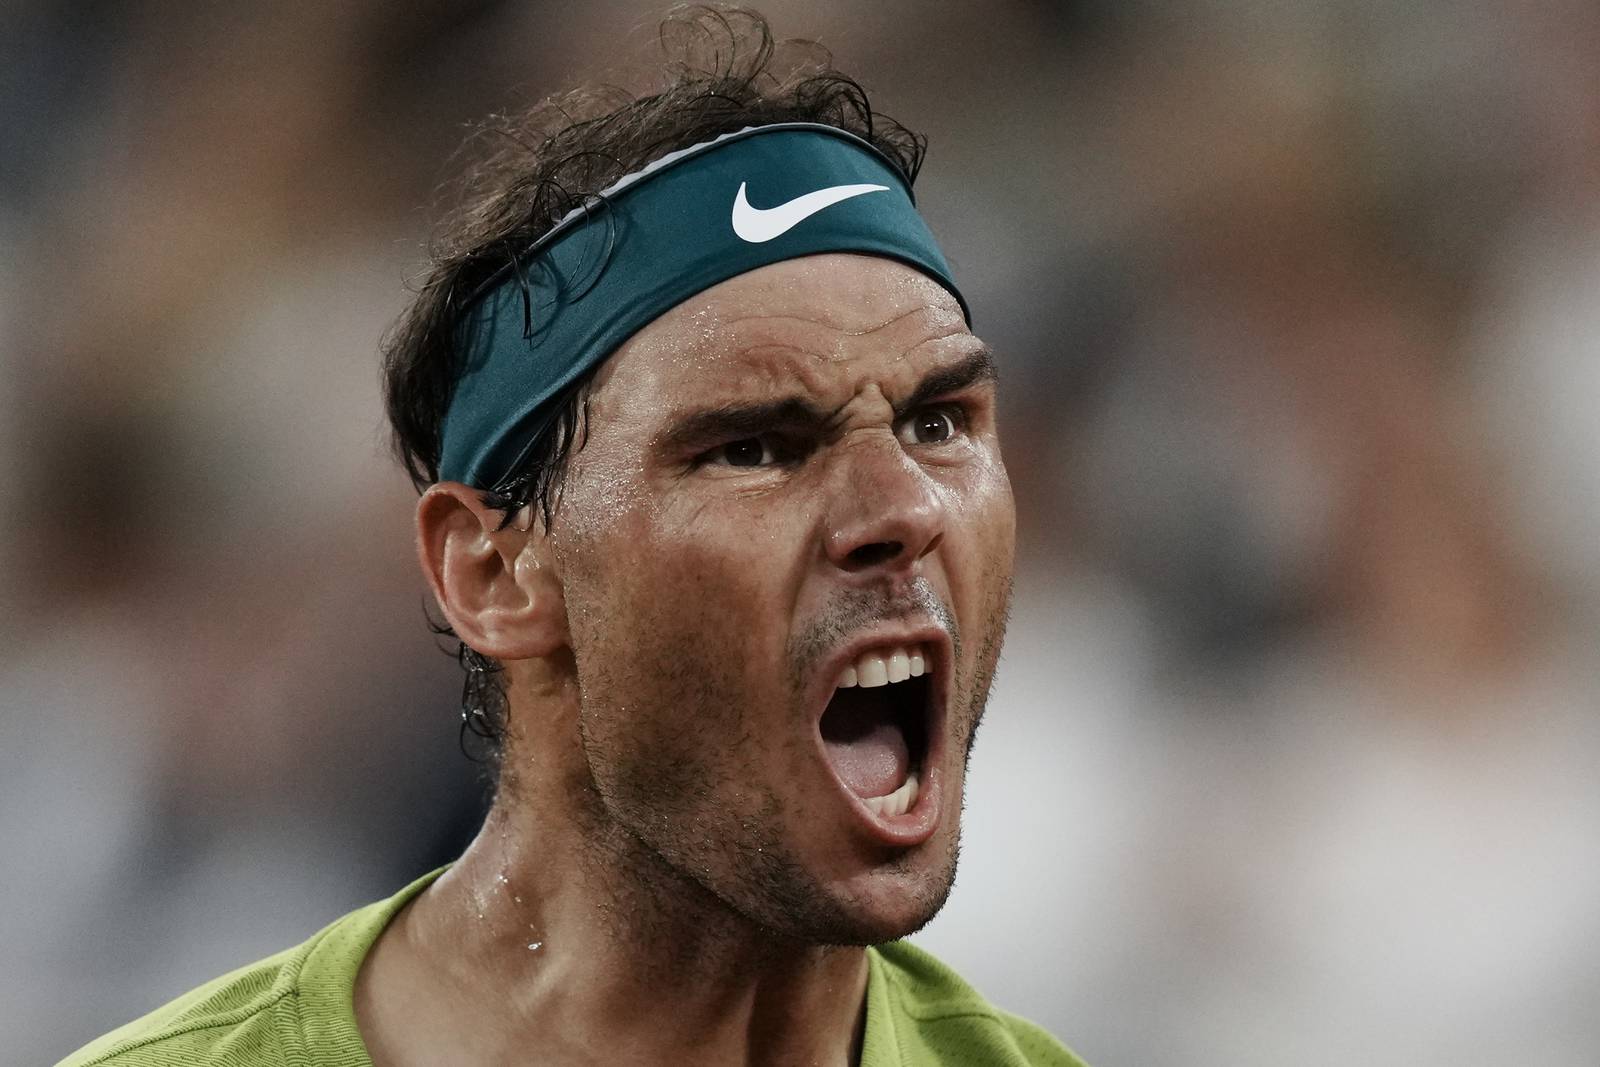 Rafael Nadal says he is feeling better and this might not be his last